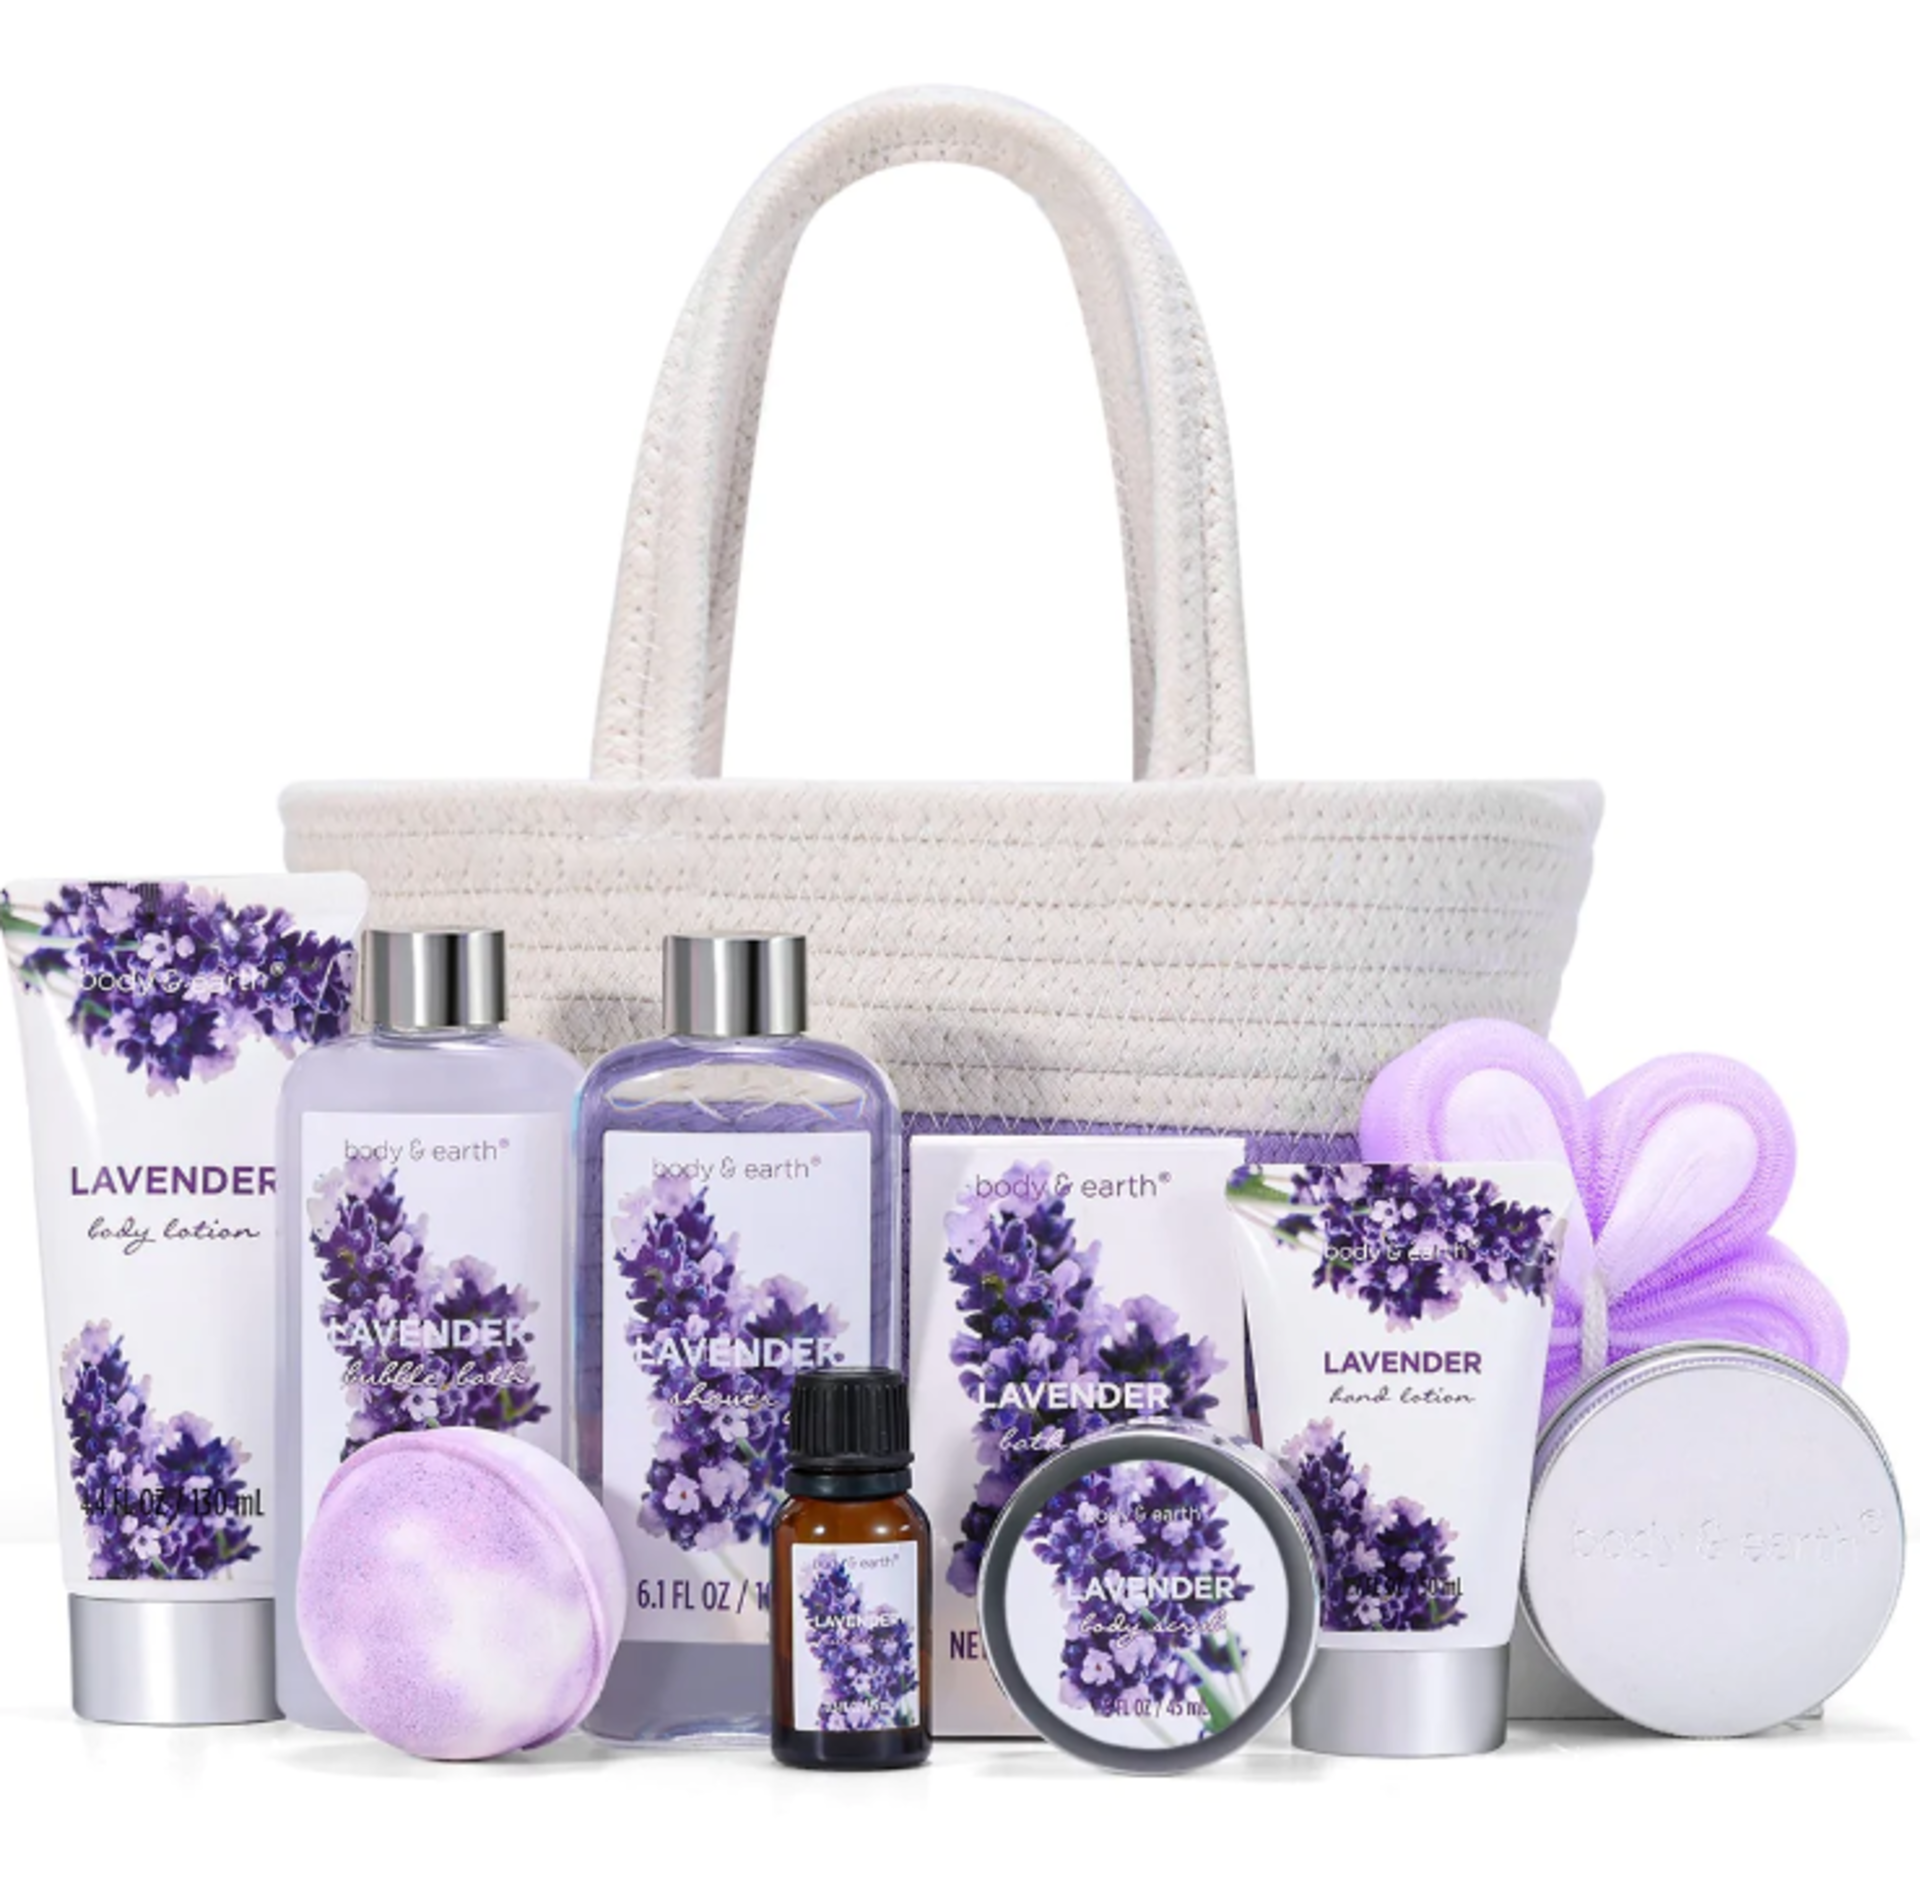 12 X NEW PACKAGED Body Earth Lavender Spa Basket Set. (BE-BP-010) Nourishing Ingredients: Formulated